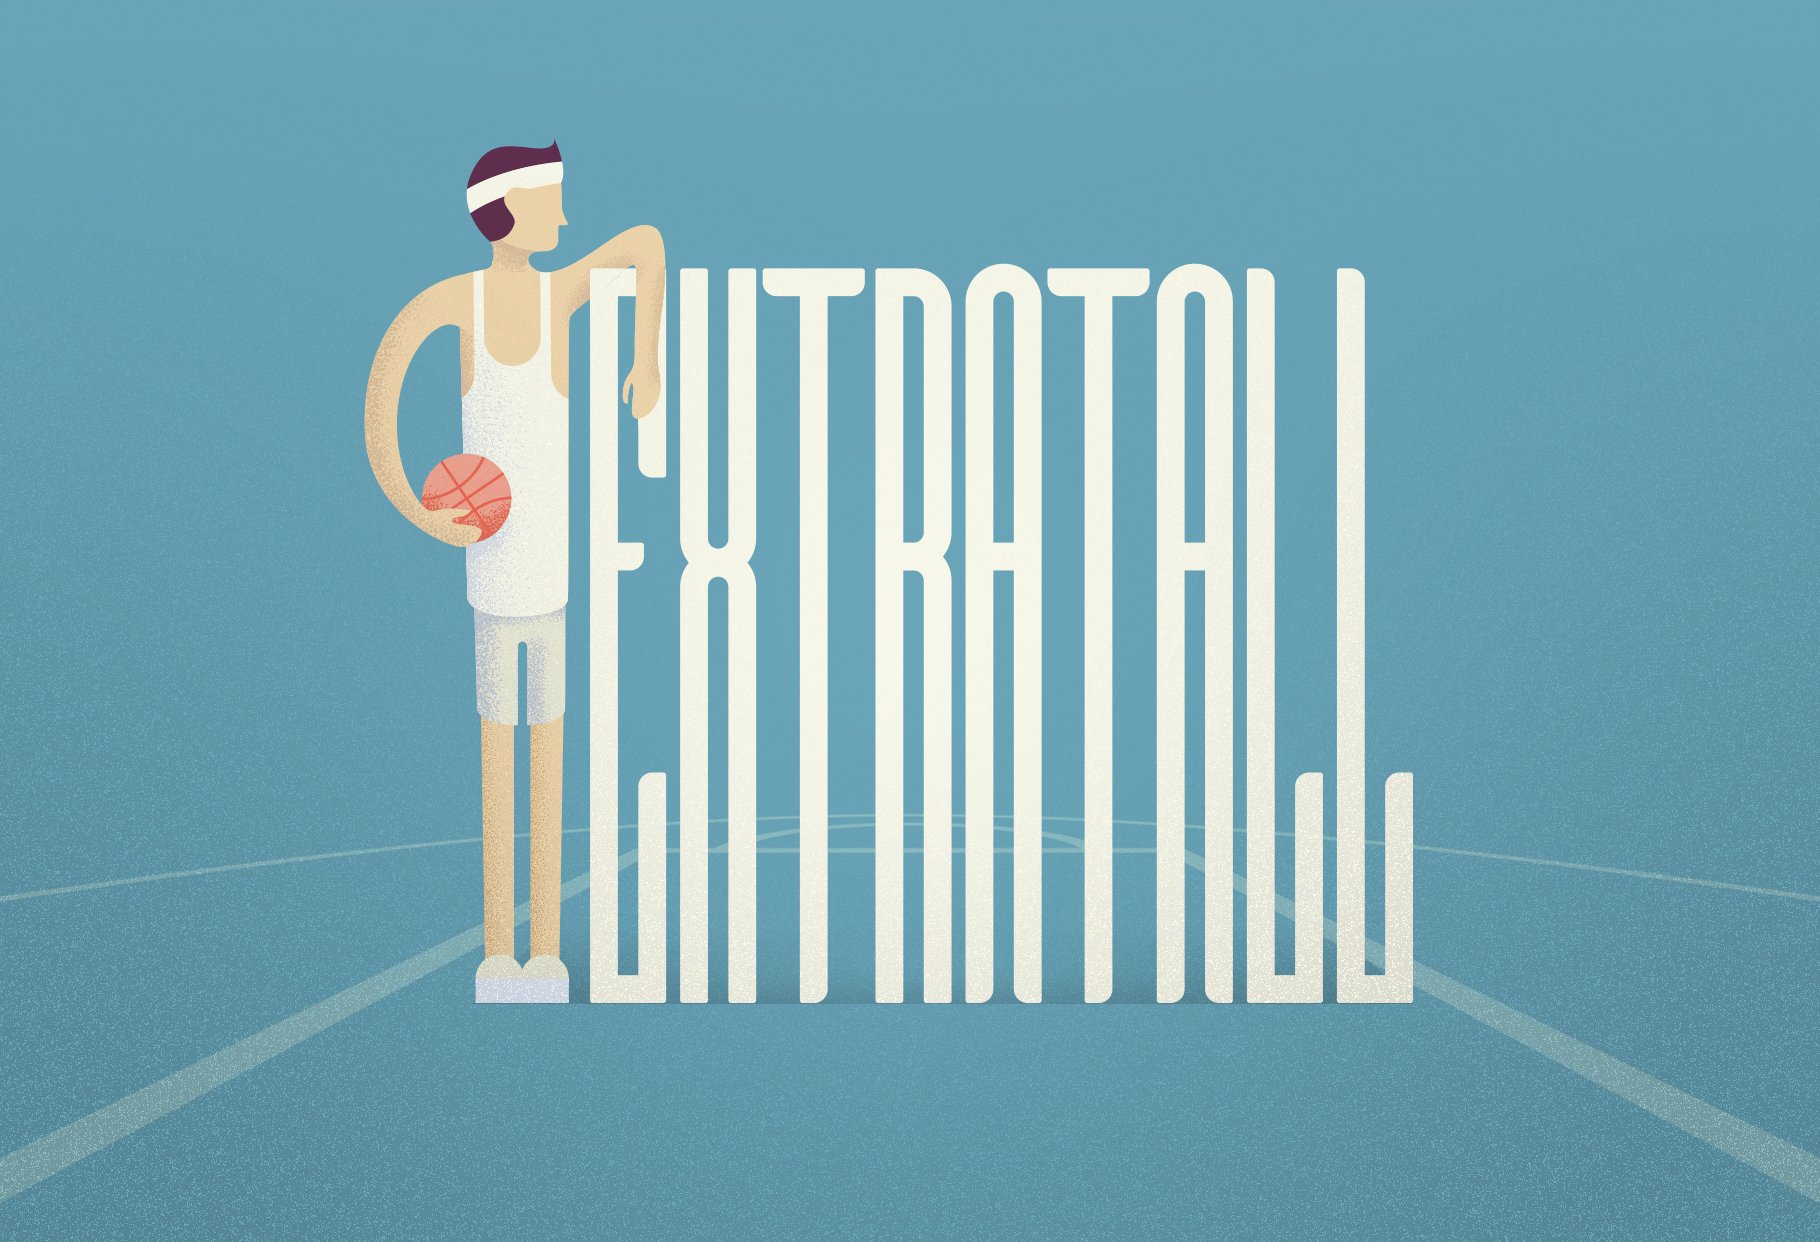 Extratall cover image.